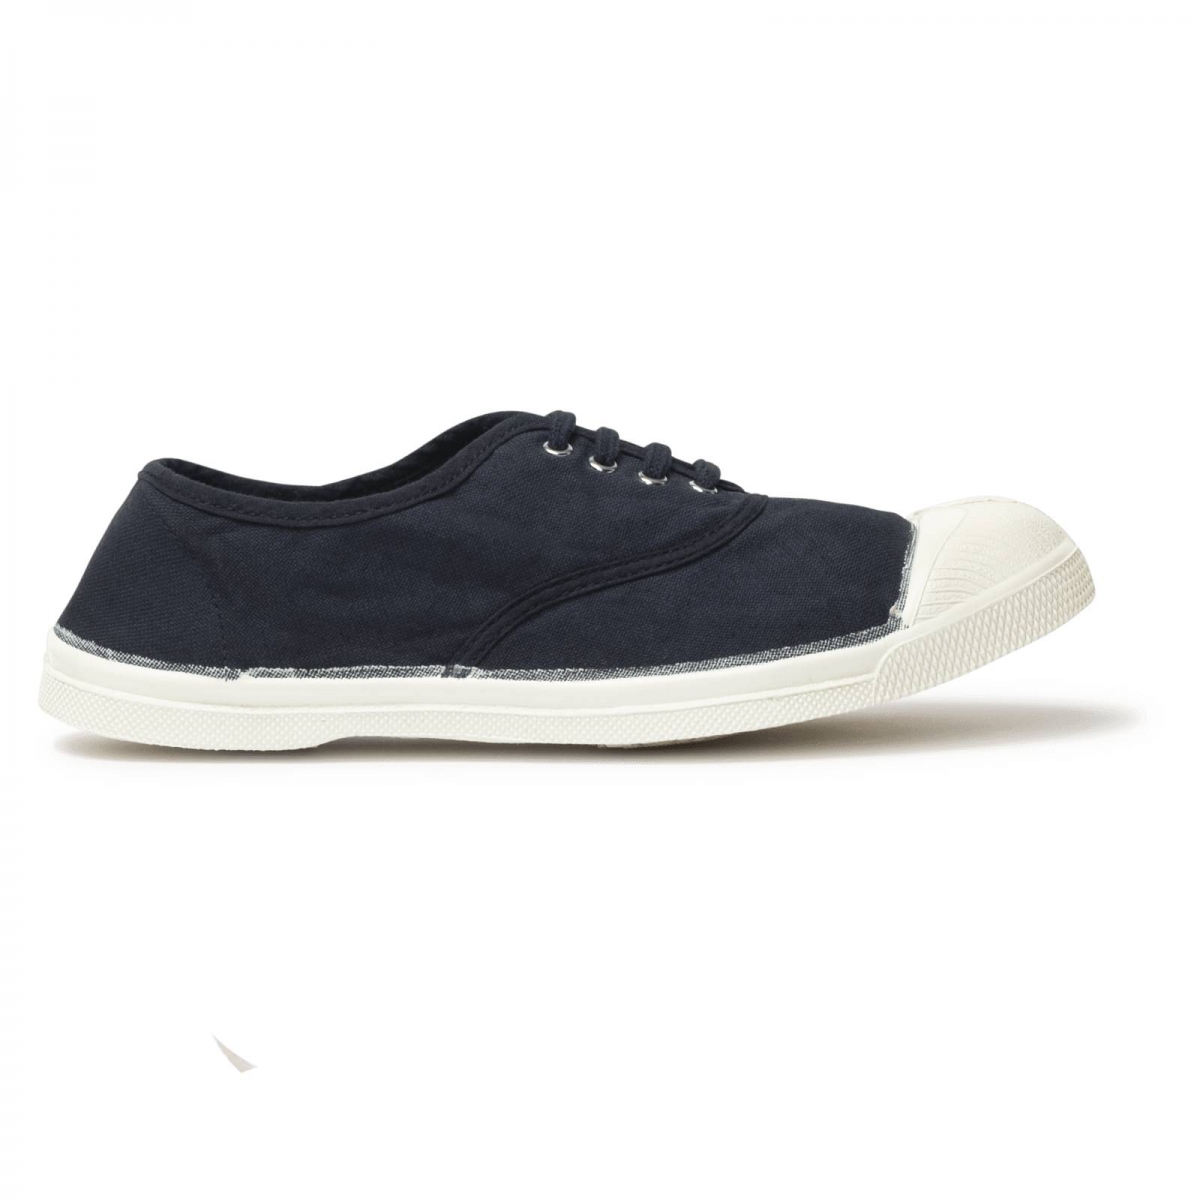 Bensimon Lace tennis sneakers adult marine F15004 - 0516